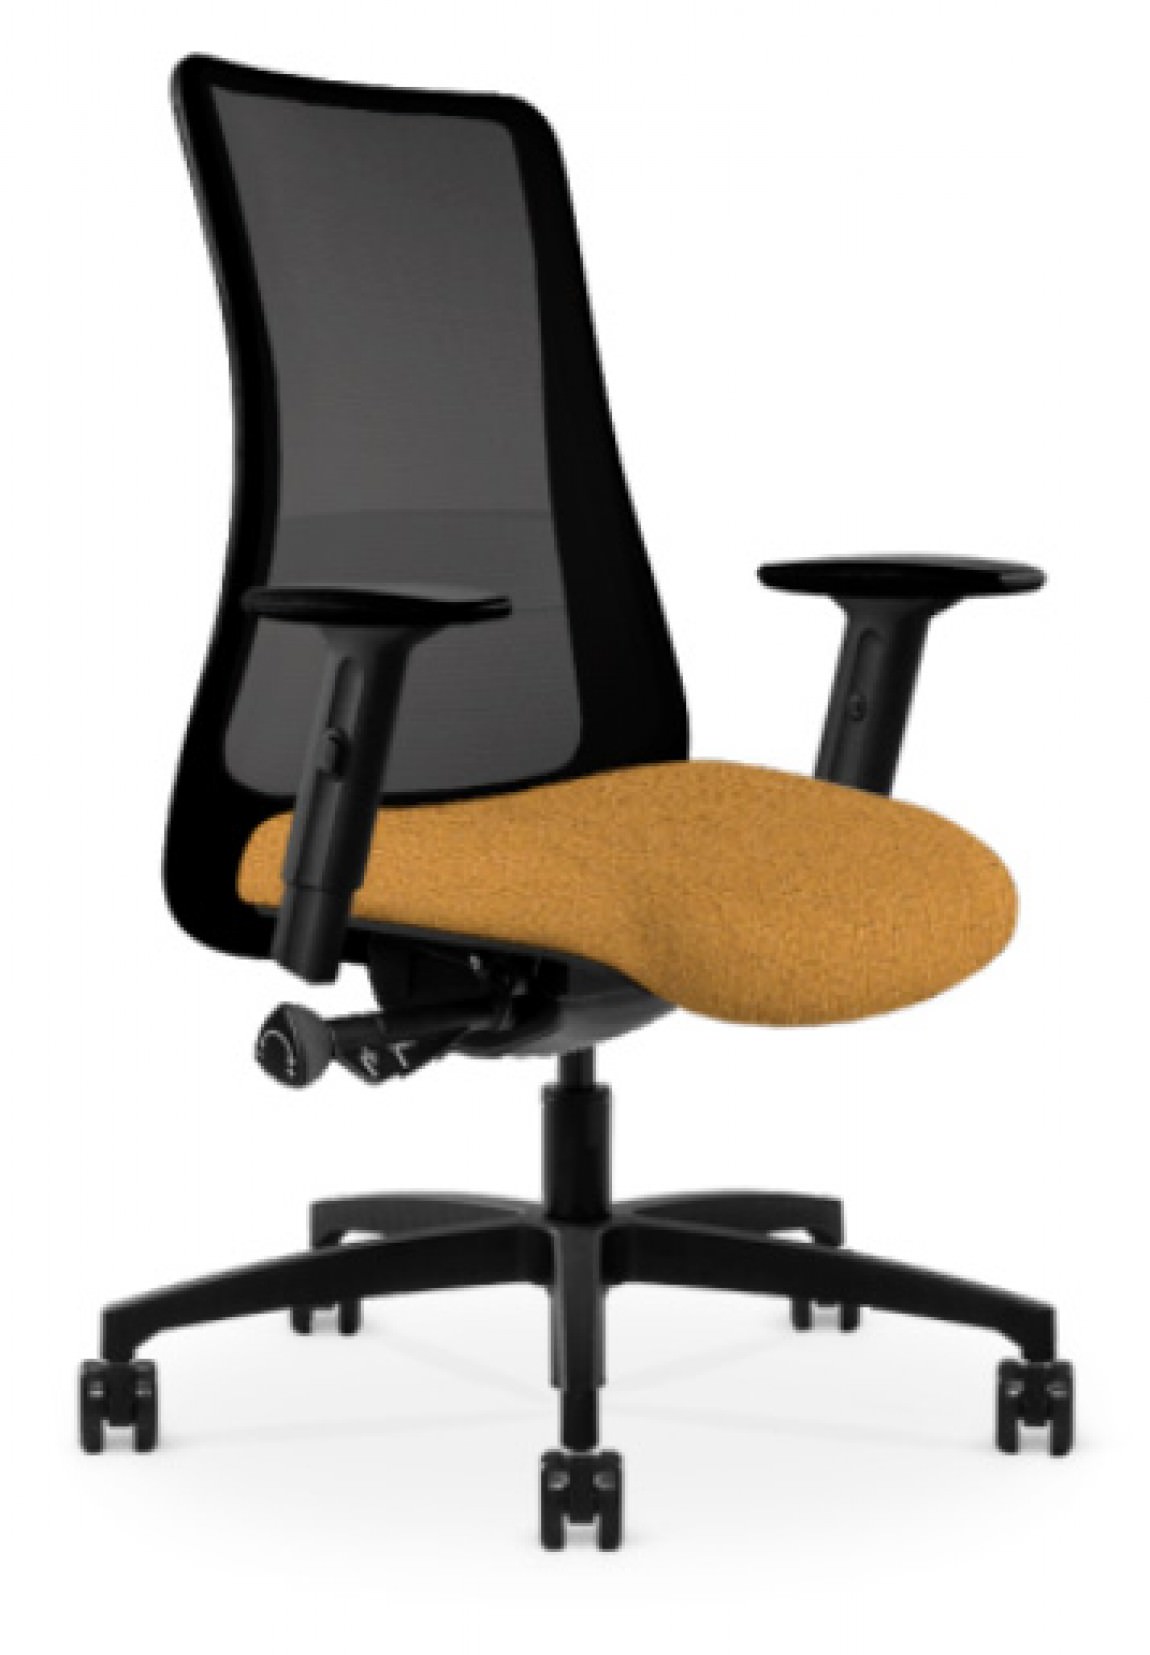 Black Copper Mesh Antimicrobial Office Chair w/ Golden Hue Seat